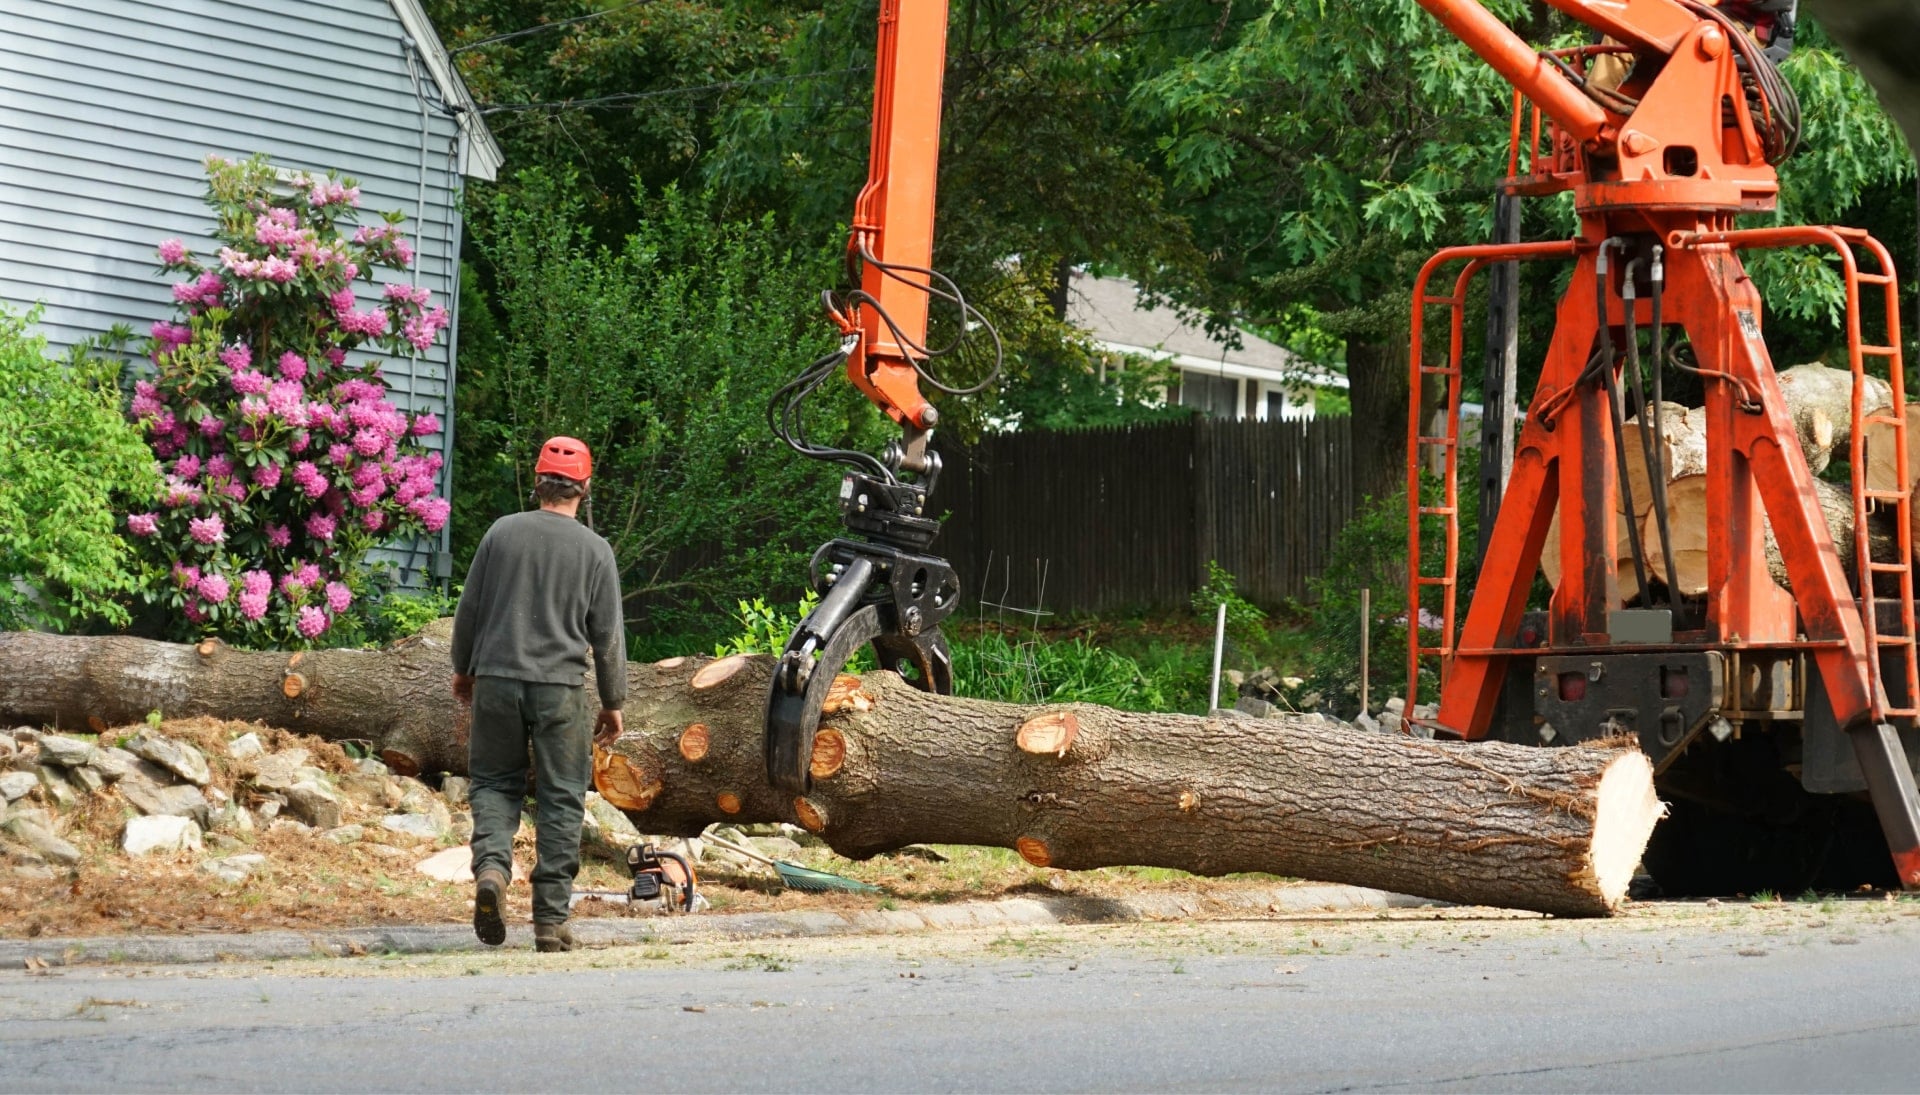 Local partner for Tree removal services in Northern Kentucky